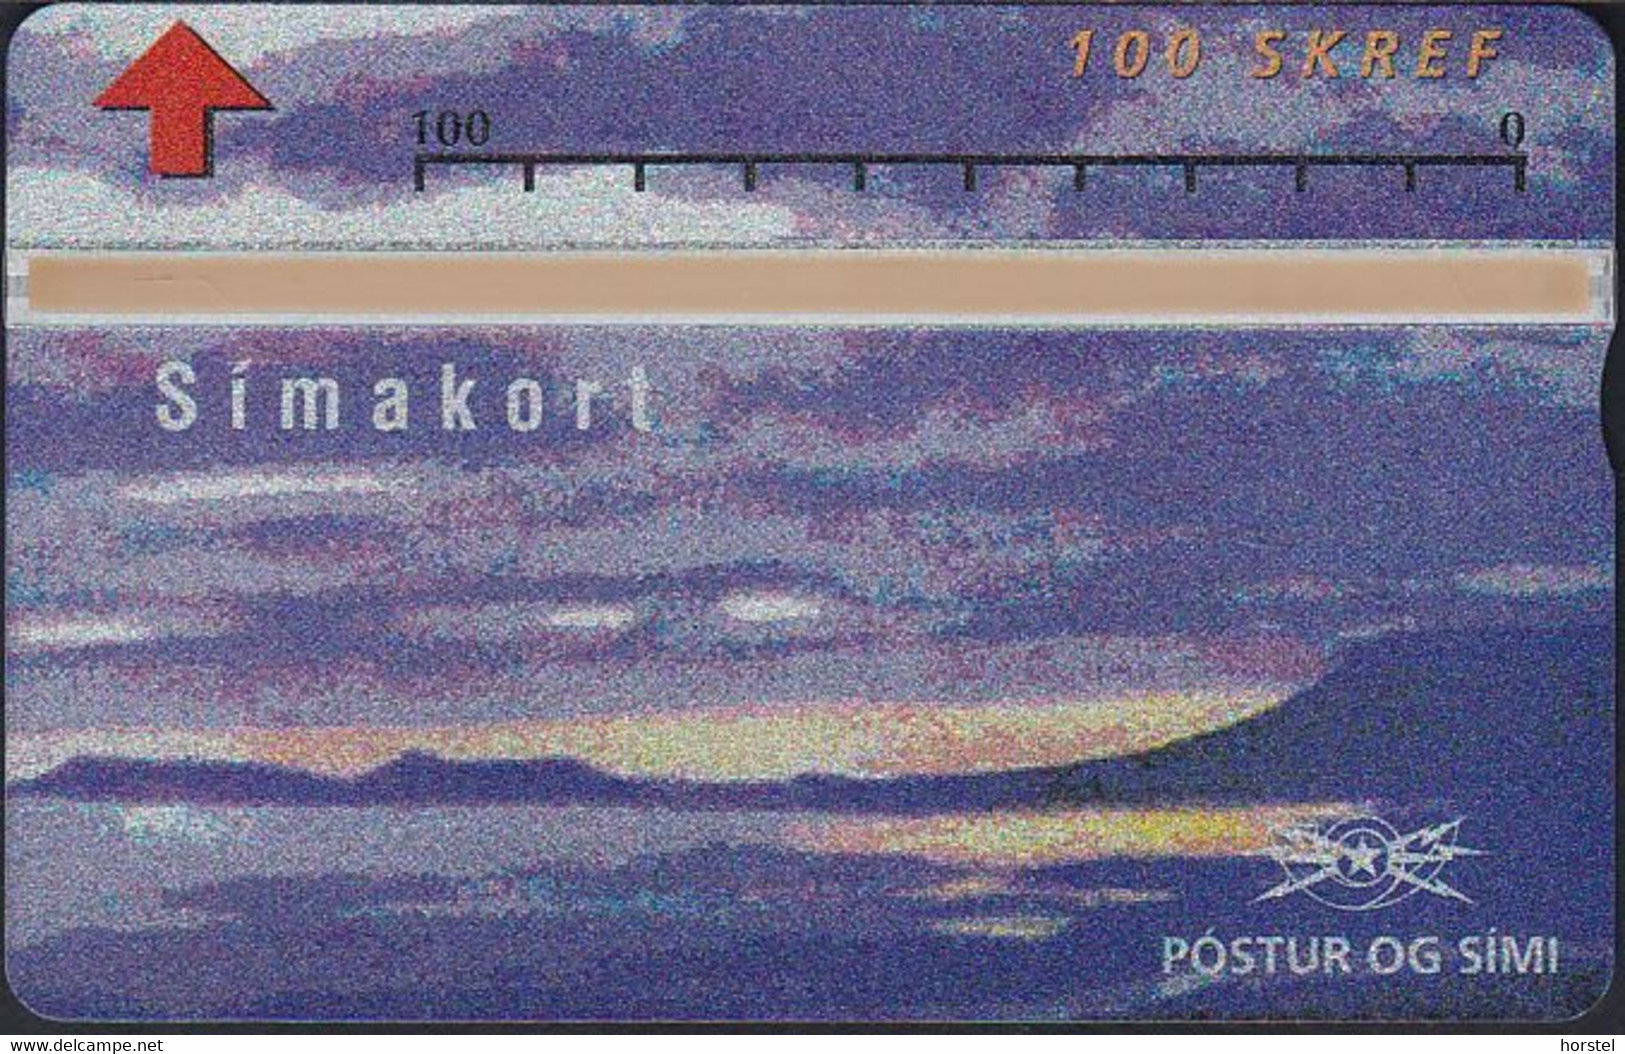 Iceland - D07 - L&G  Painting - View Of Island (2) - 100 Units - 303C - Mint - Iceland